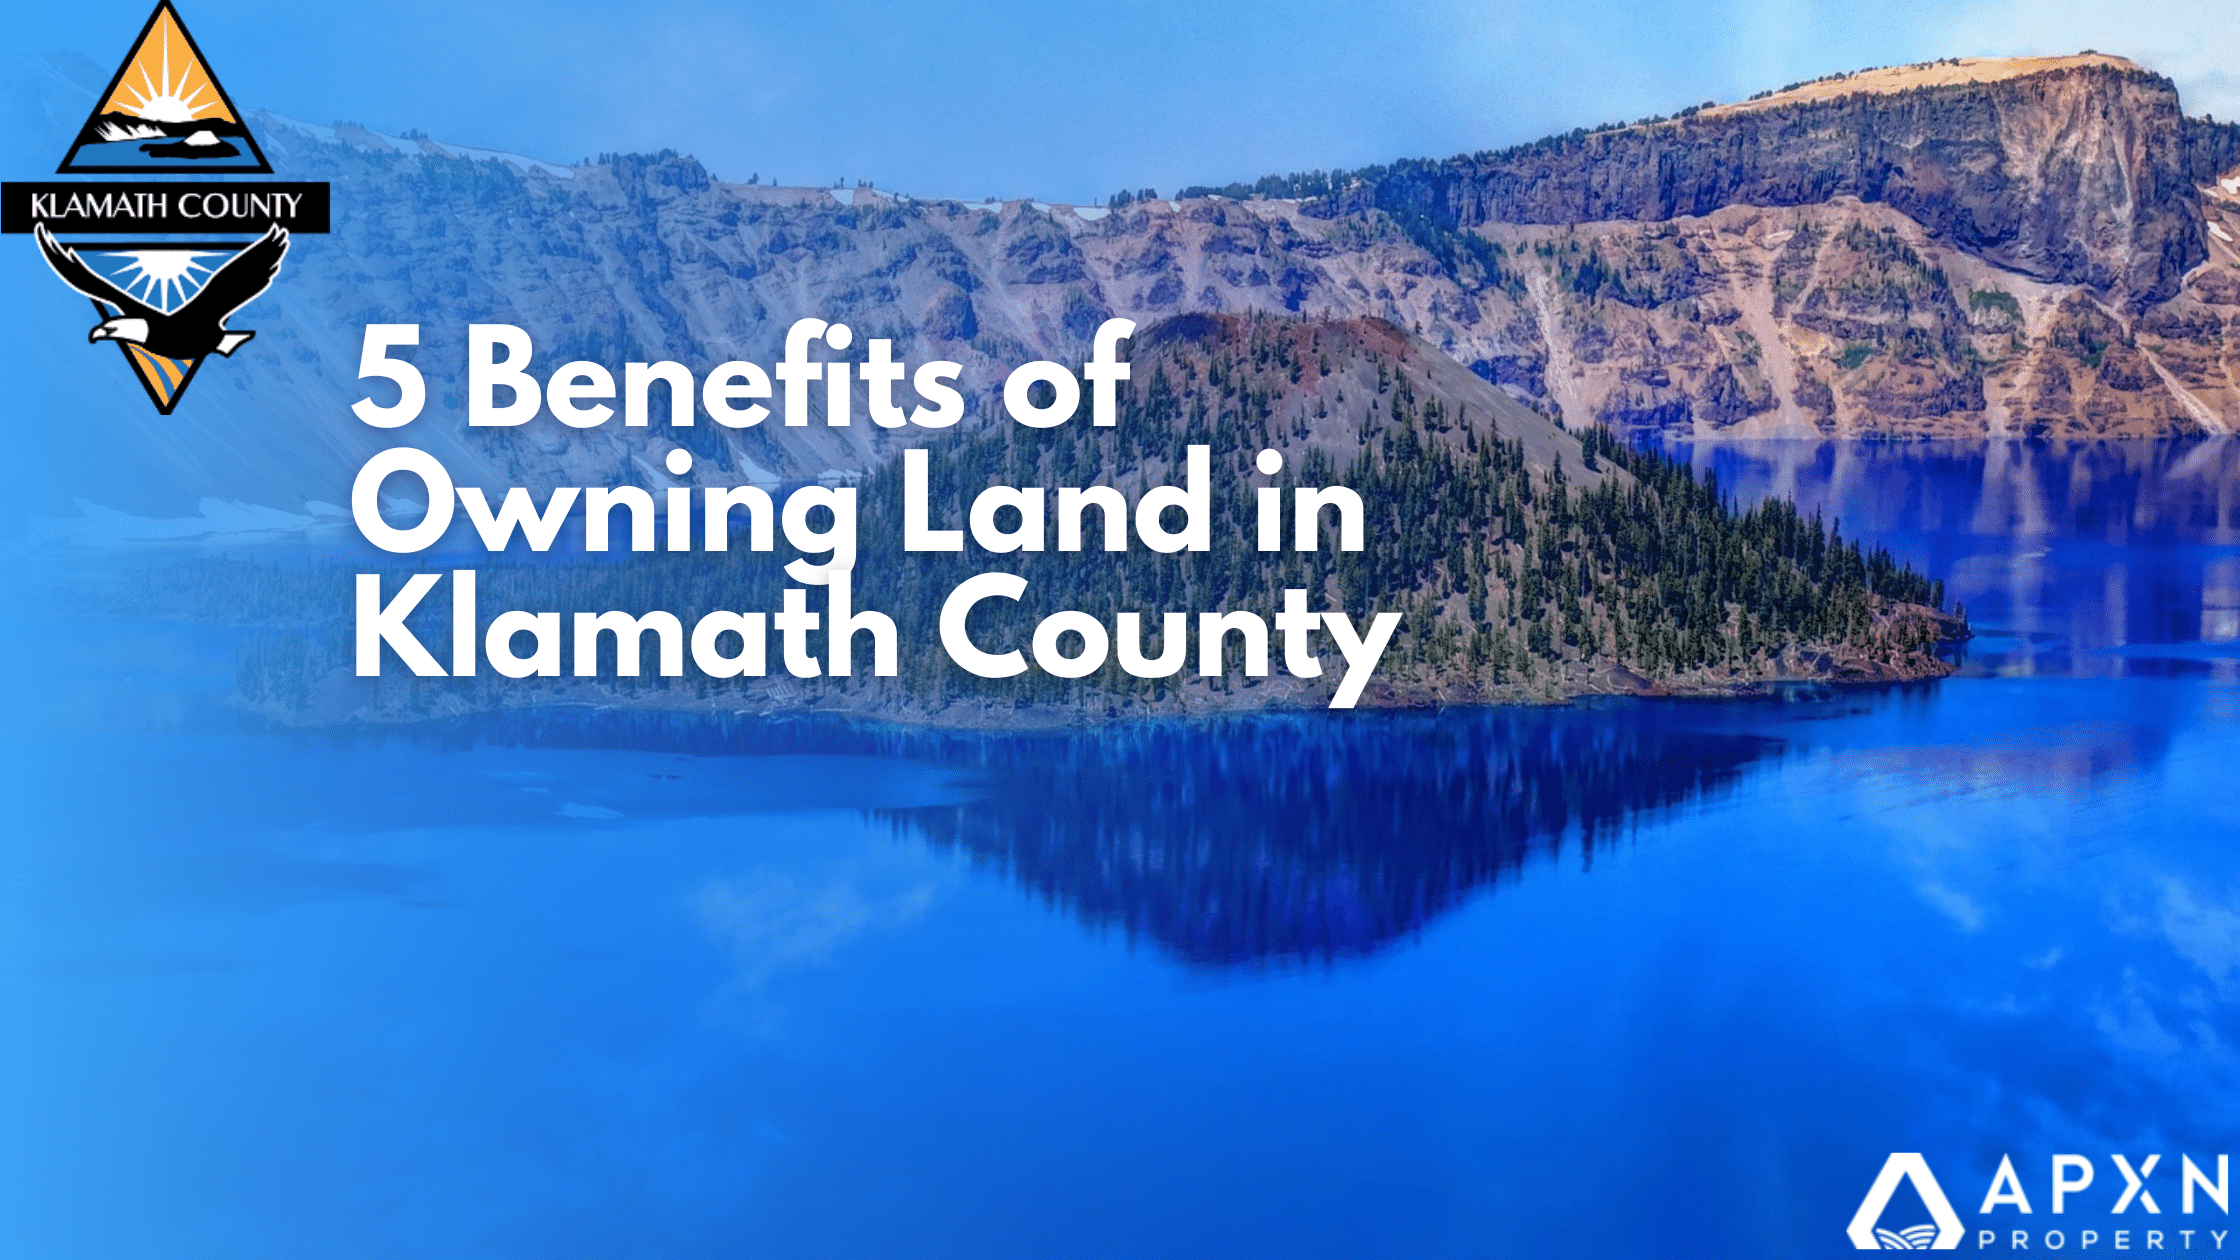 Five benefits of owning land in klamath county